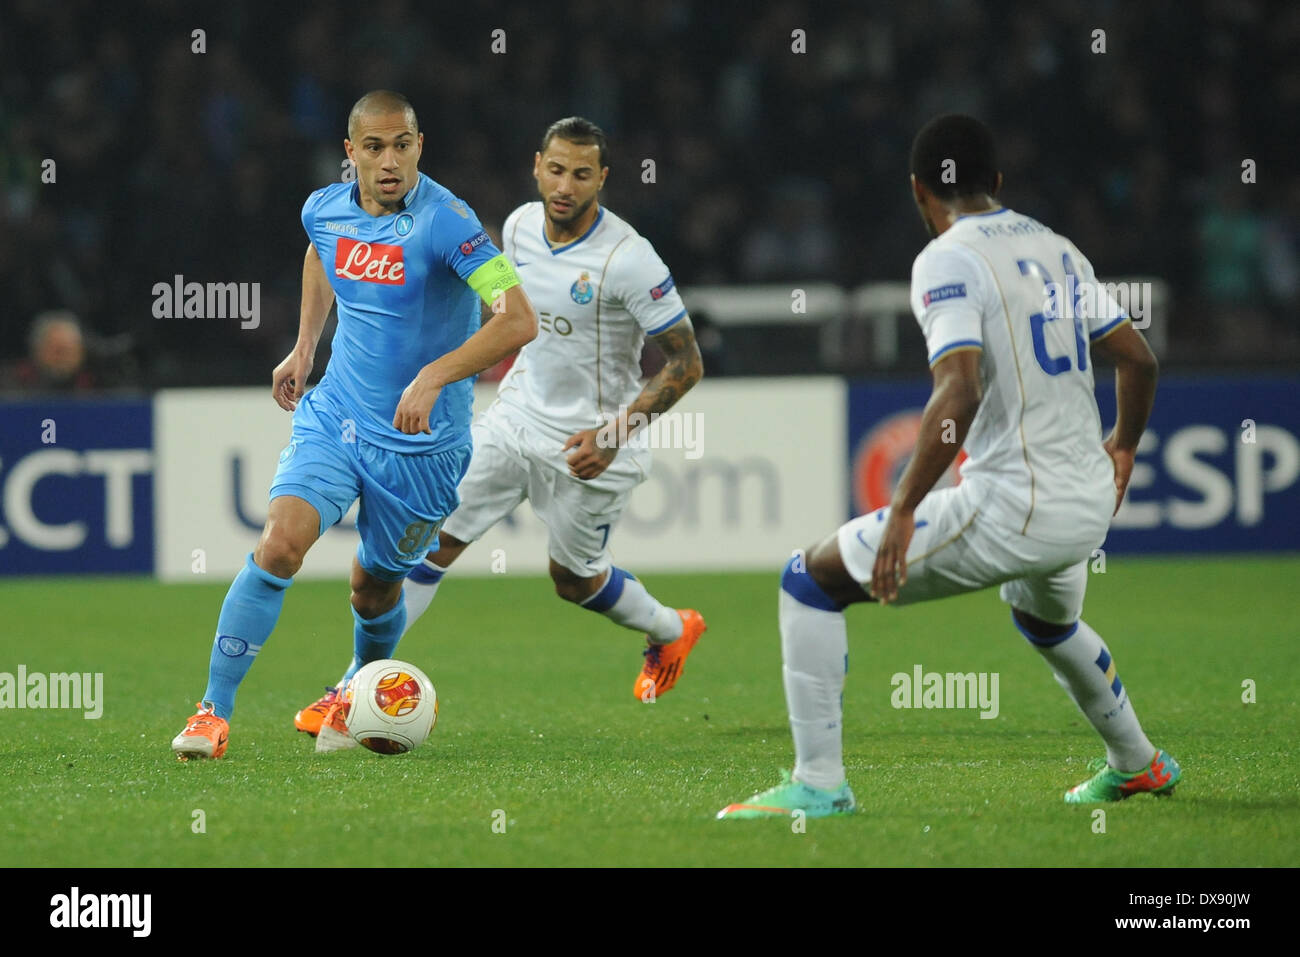 Naples, ITALY. 20th Mar, 2014. Gokhan Inler during the UEFA Europa League Round of 16 Second Leg match between SSC Napoli and FC Porto Football/Soccer at Stadio San Paolo on March 20, 2014 in Naples, Italy. Credit:  Franco Romano/NurPhoto/ZUMAPRESS.com/Alamy Live News Stock Photo